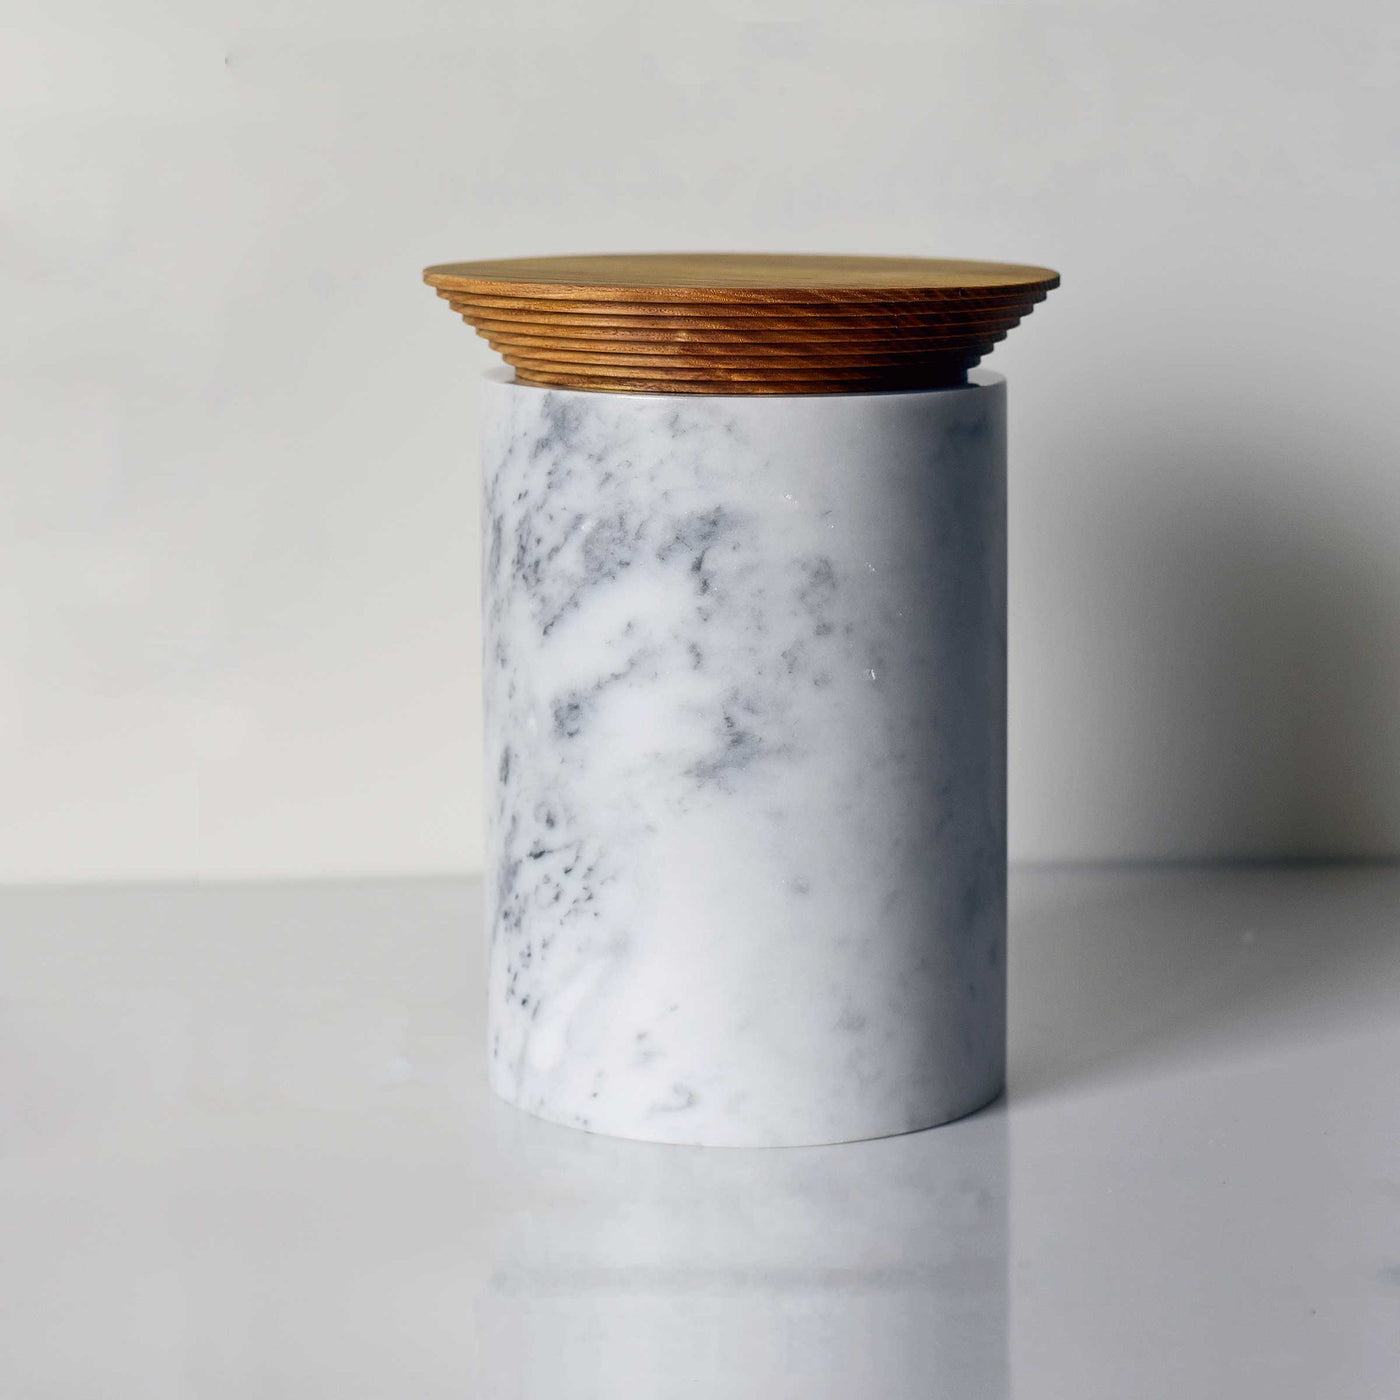 Marble and Ash Wood Container IS 010